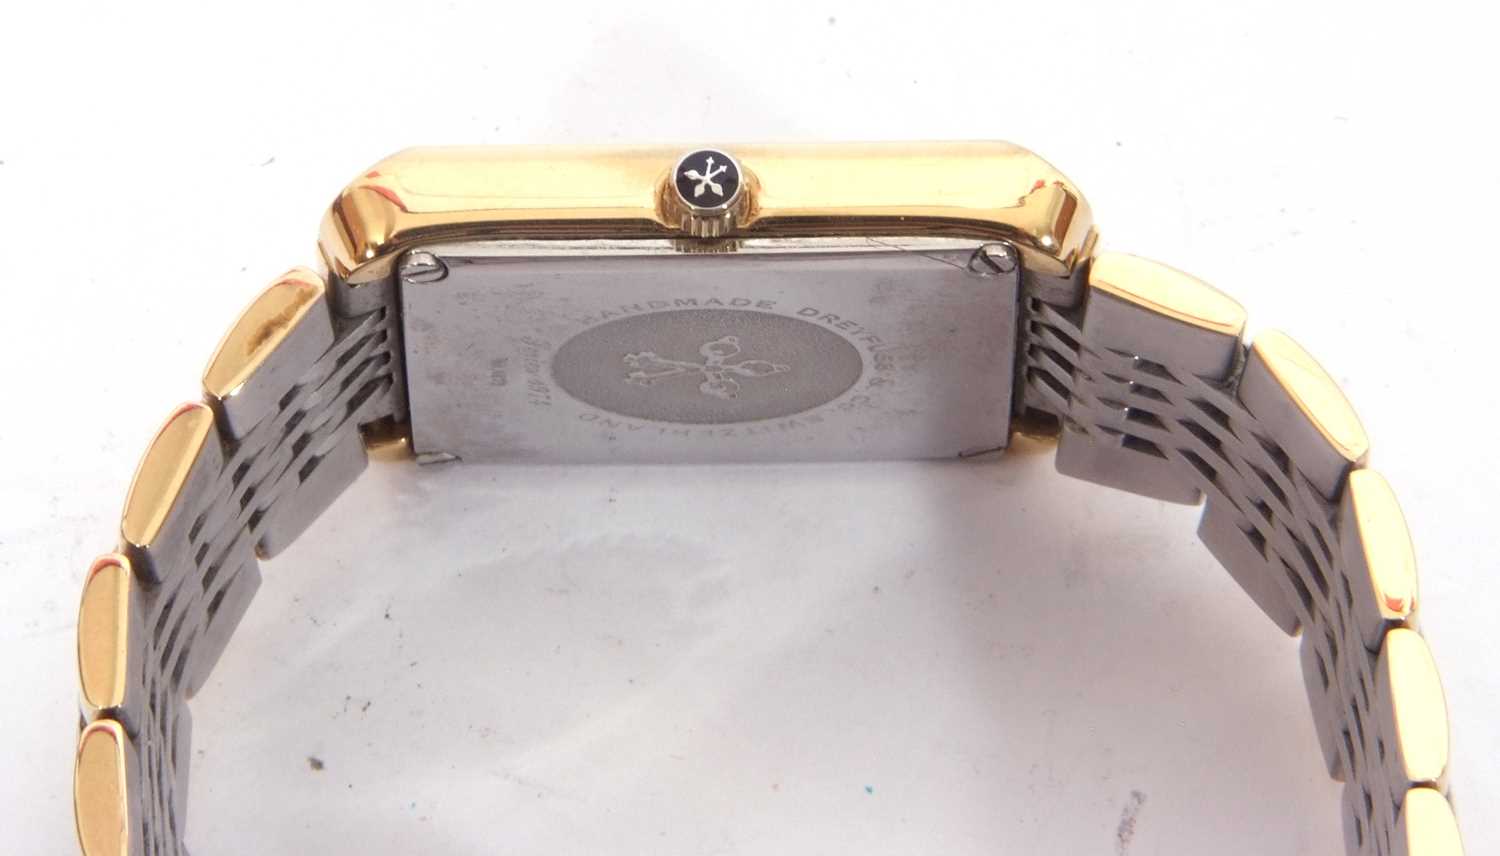 Dreyfuss & Co gent's wrist watch, ref no 1974, date function window, the case gold plated, and a - Image 7 of 10